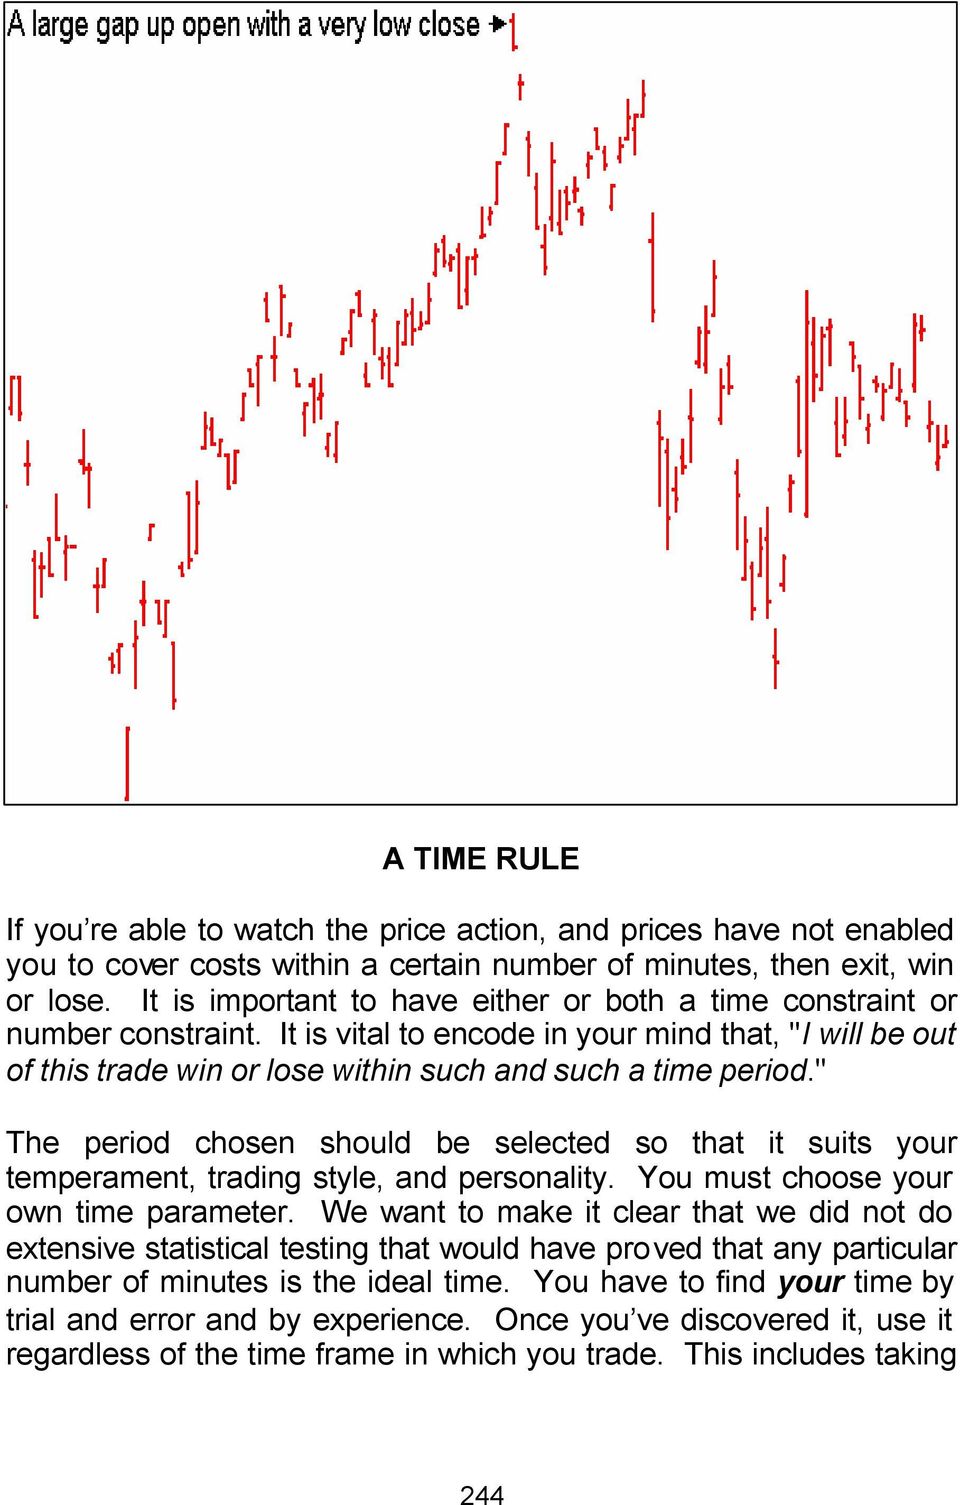 " The period chosen should be selected so that it suits your temperament, trading style, and personality. You must choose your own time parameter.